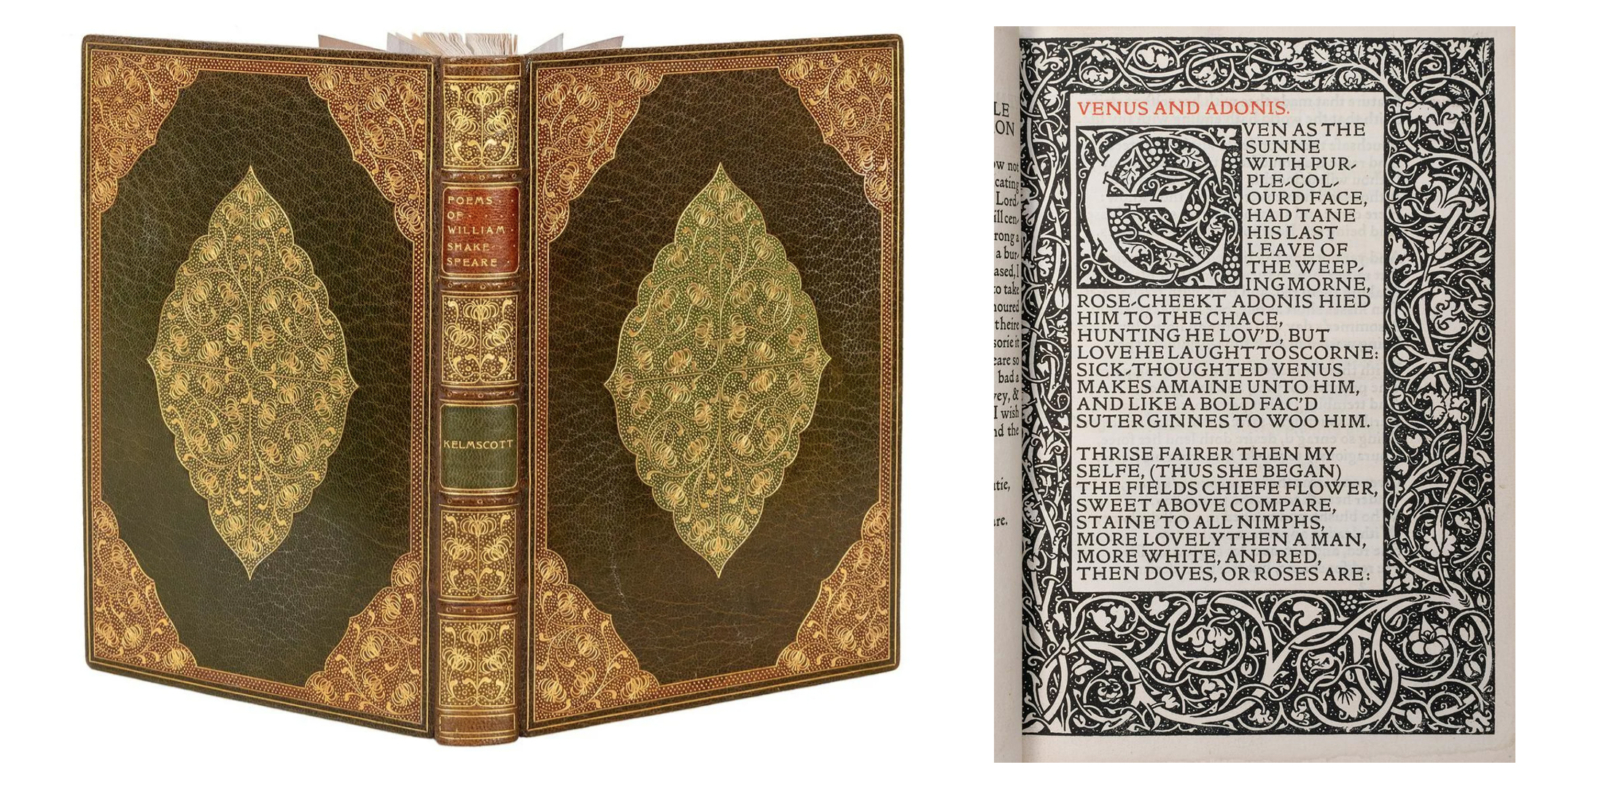 Kelmscott Press’s The Poems of William Shakespeare brought $14,000 plus the buyer’s premium in October 2022. Image courtesy of Potter & Potter Auctions and LiveAuctioneers.